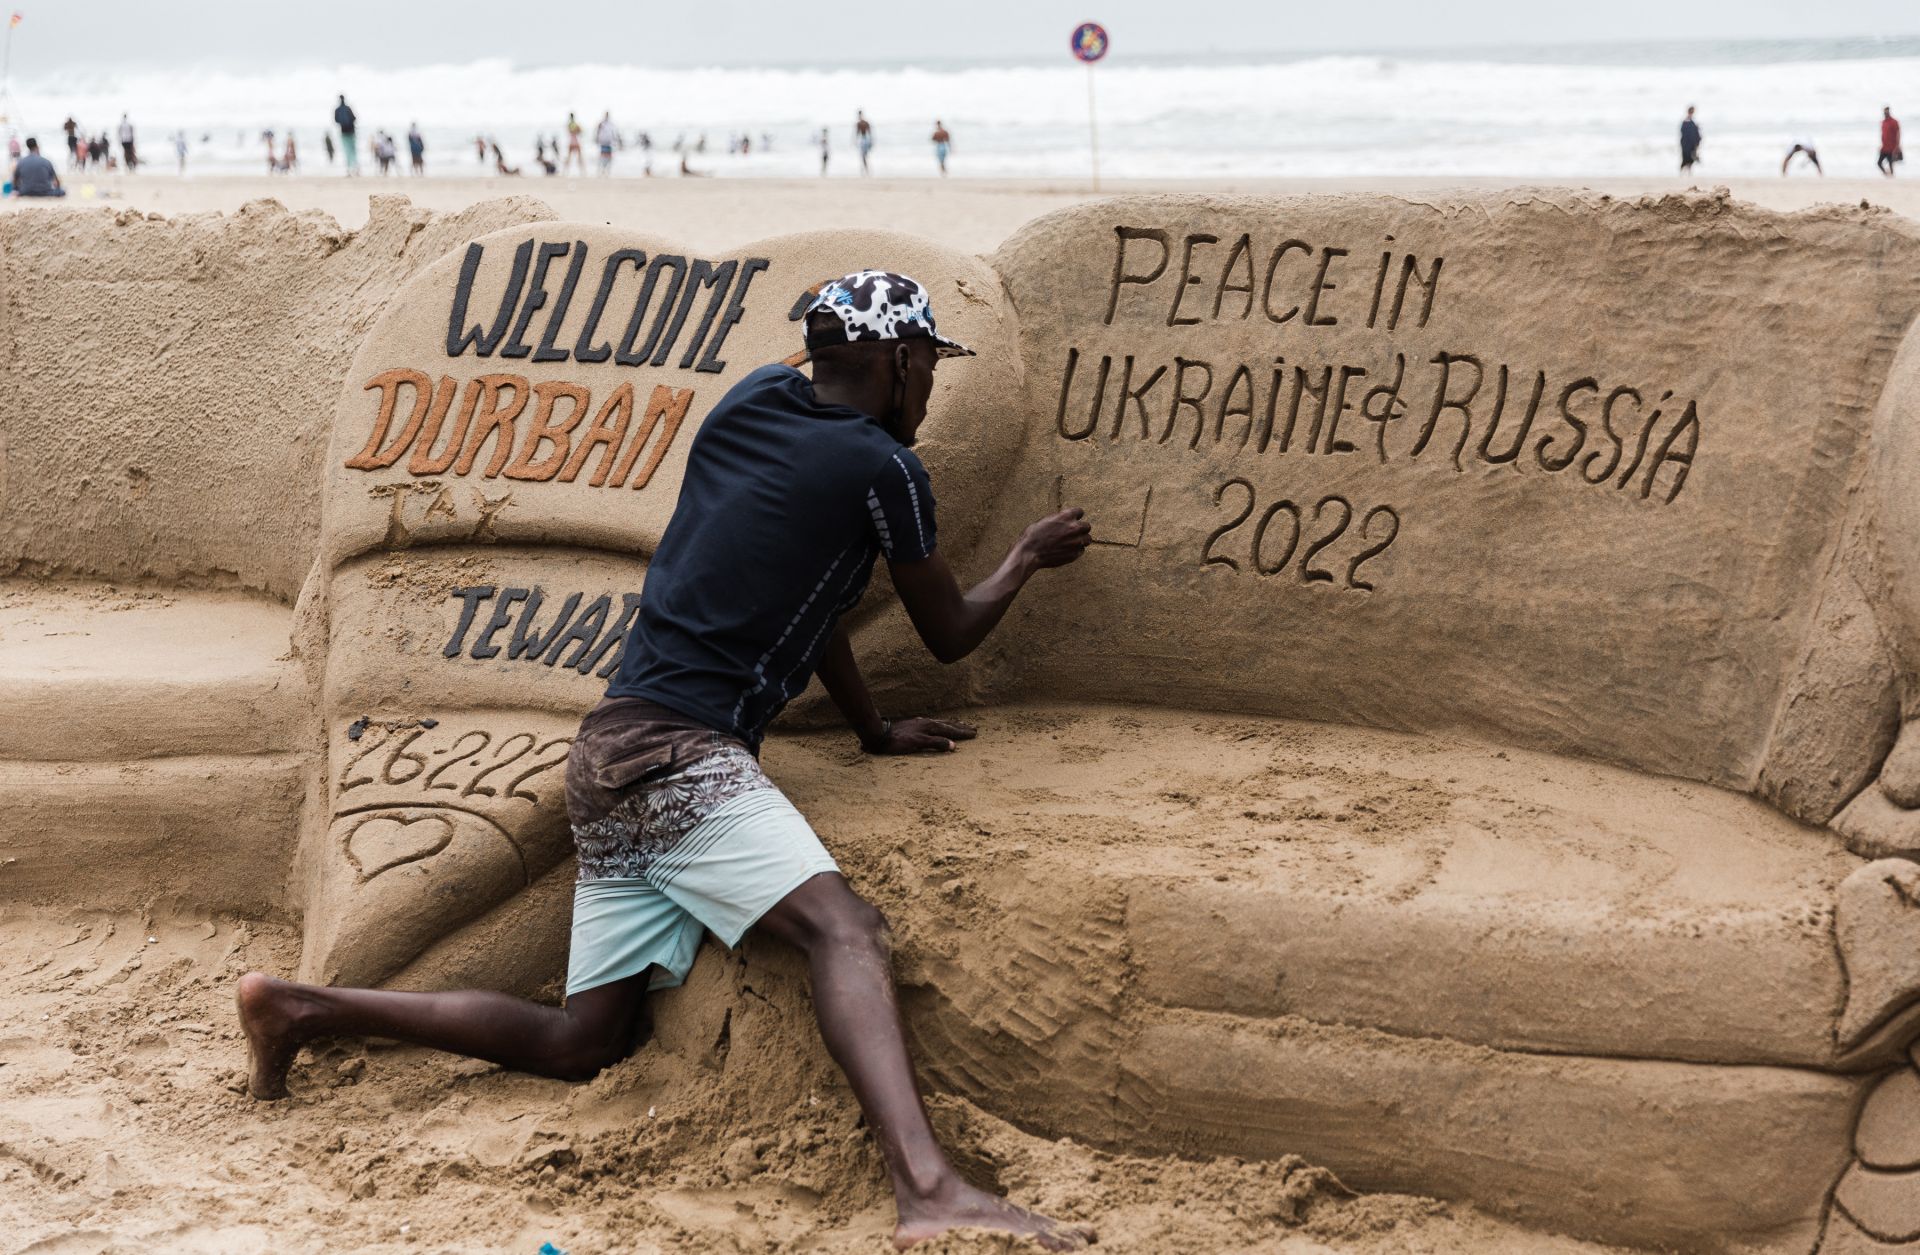 A sand sculptor writes a message calling for peace between Ukraine and Russia on a beach in Durban, South Africa, on Feb. 27, 2022. 